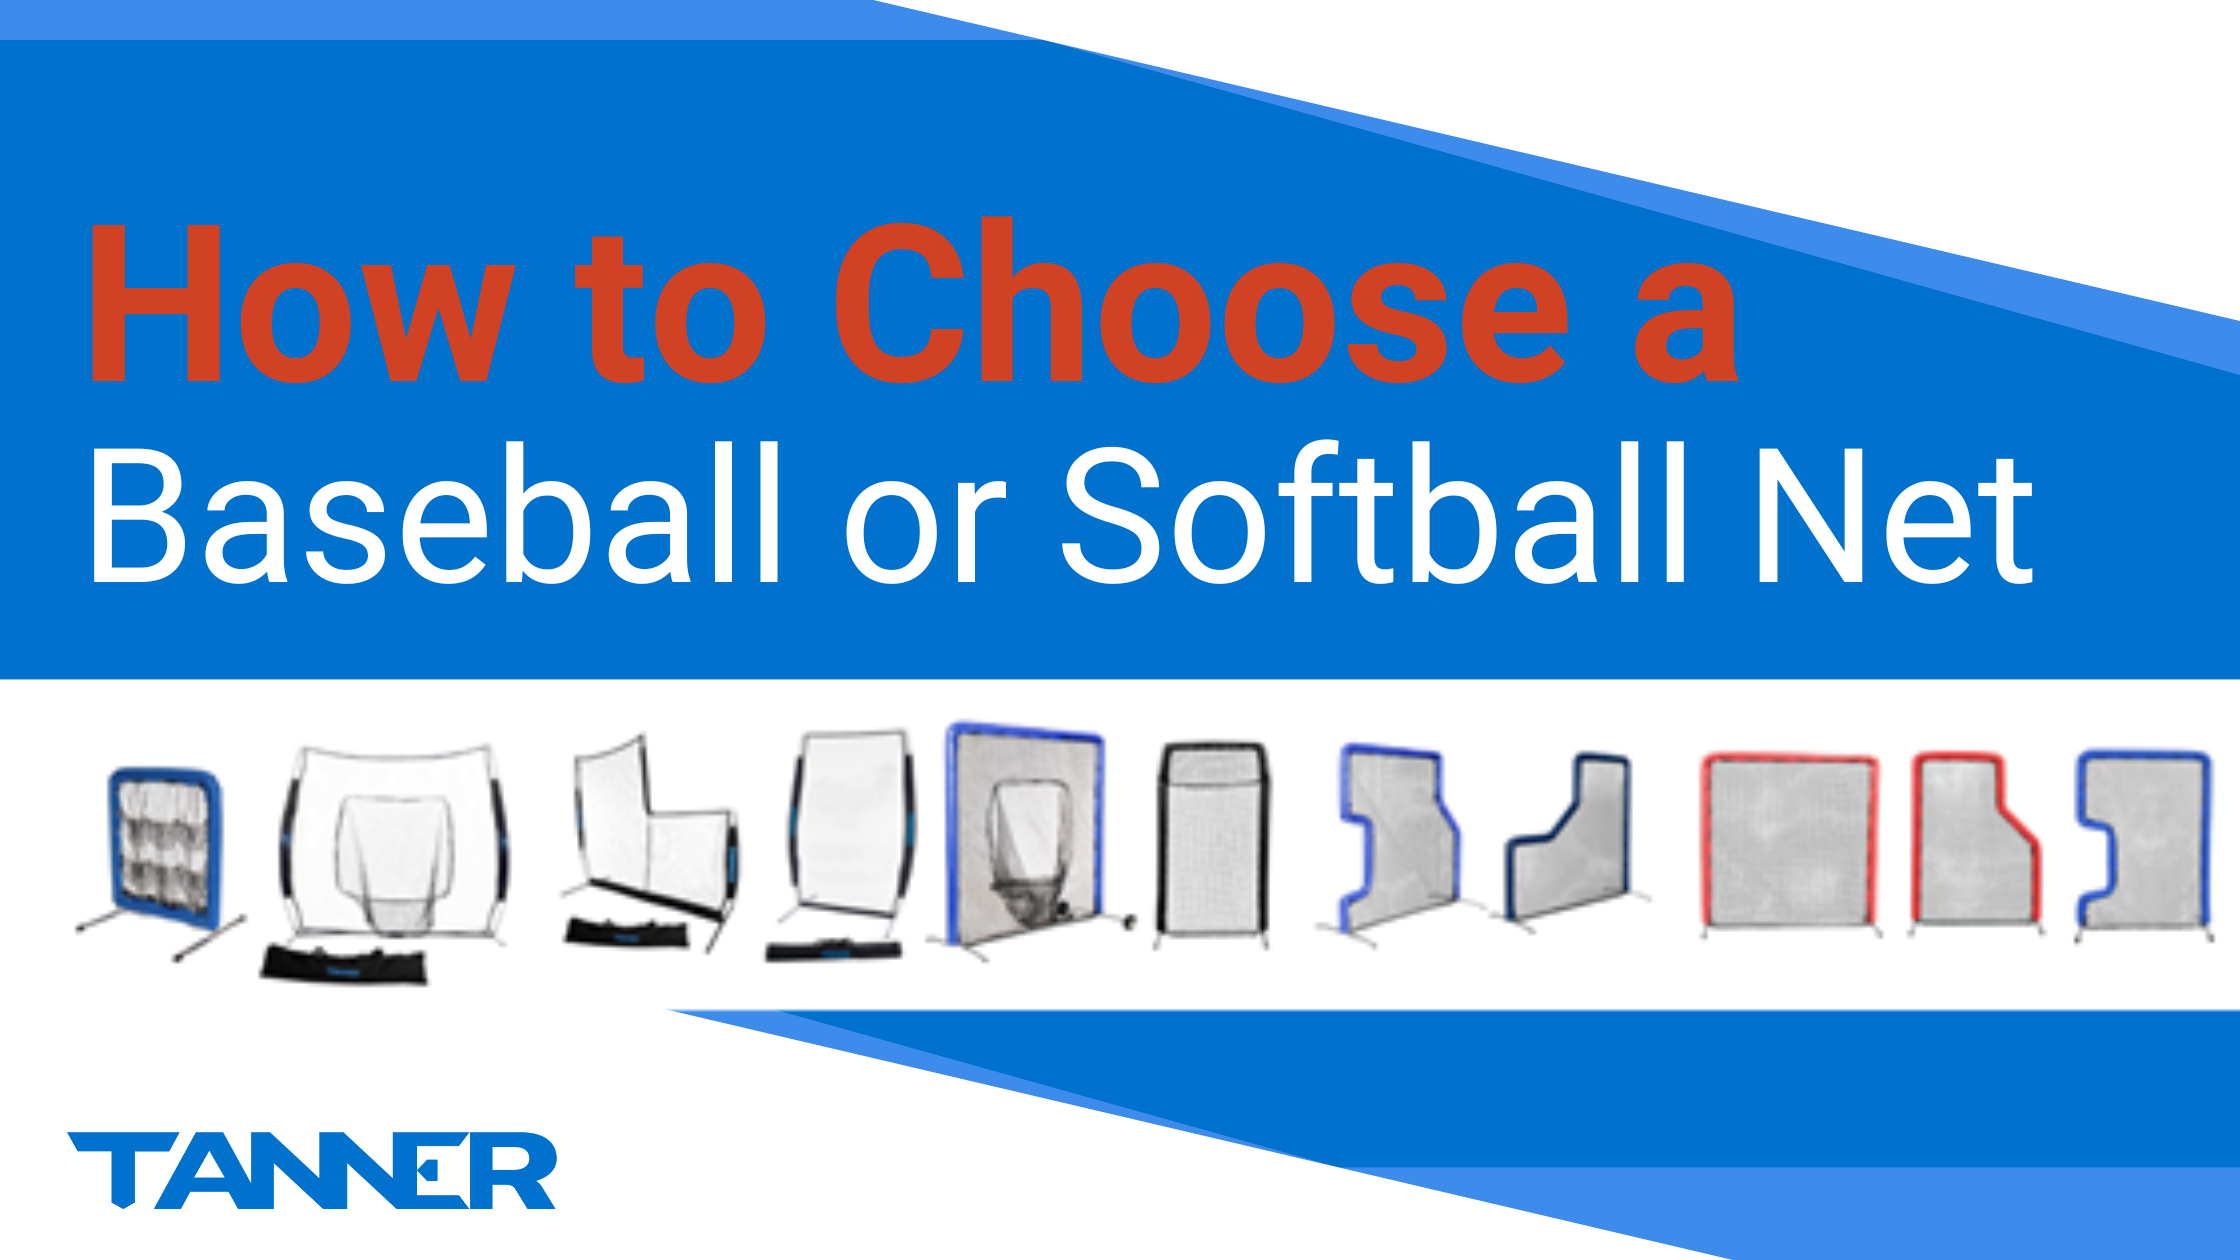 Guide to the 4 Most Popular Types of Softball and Baseball Nets